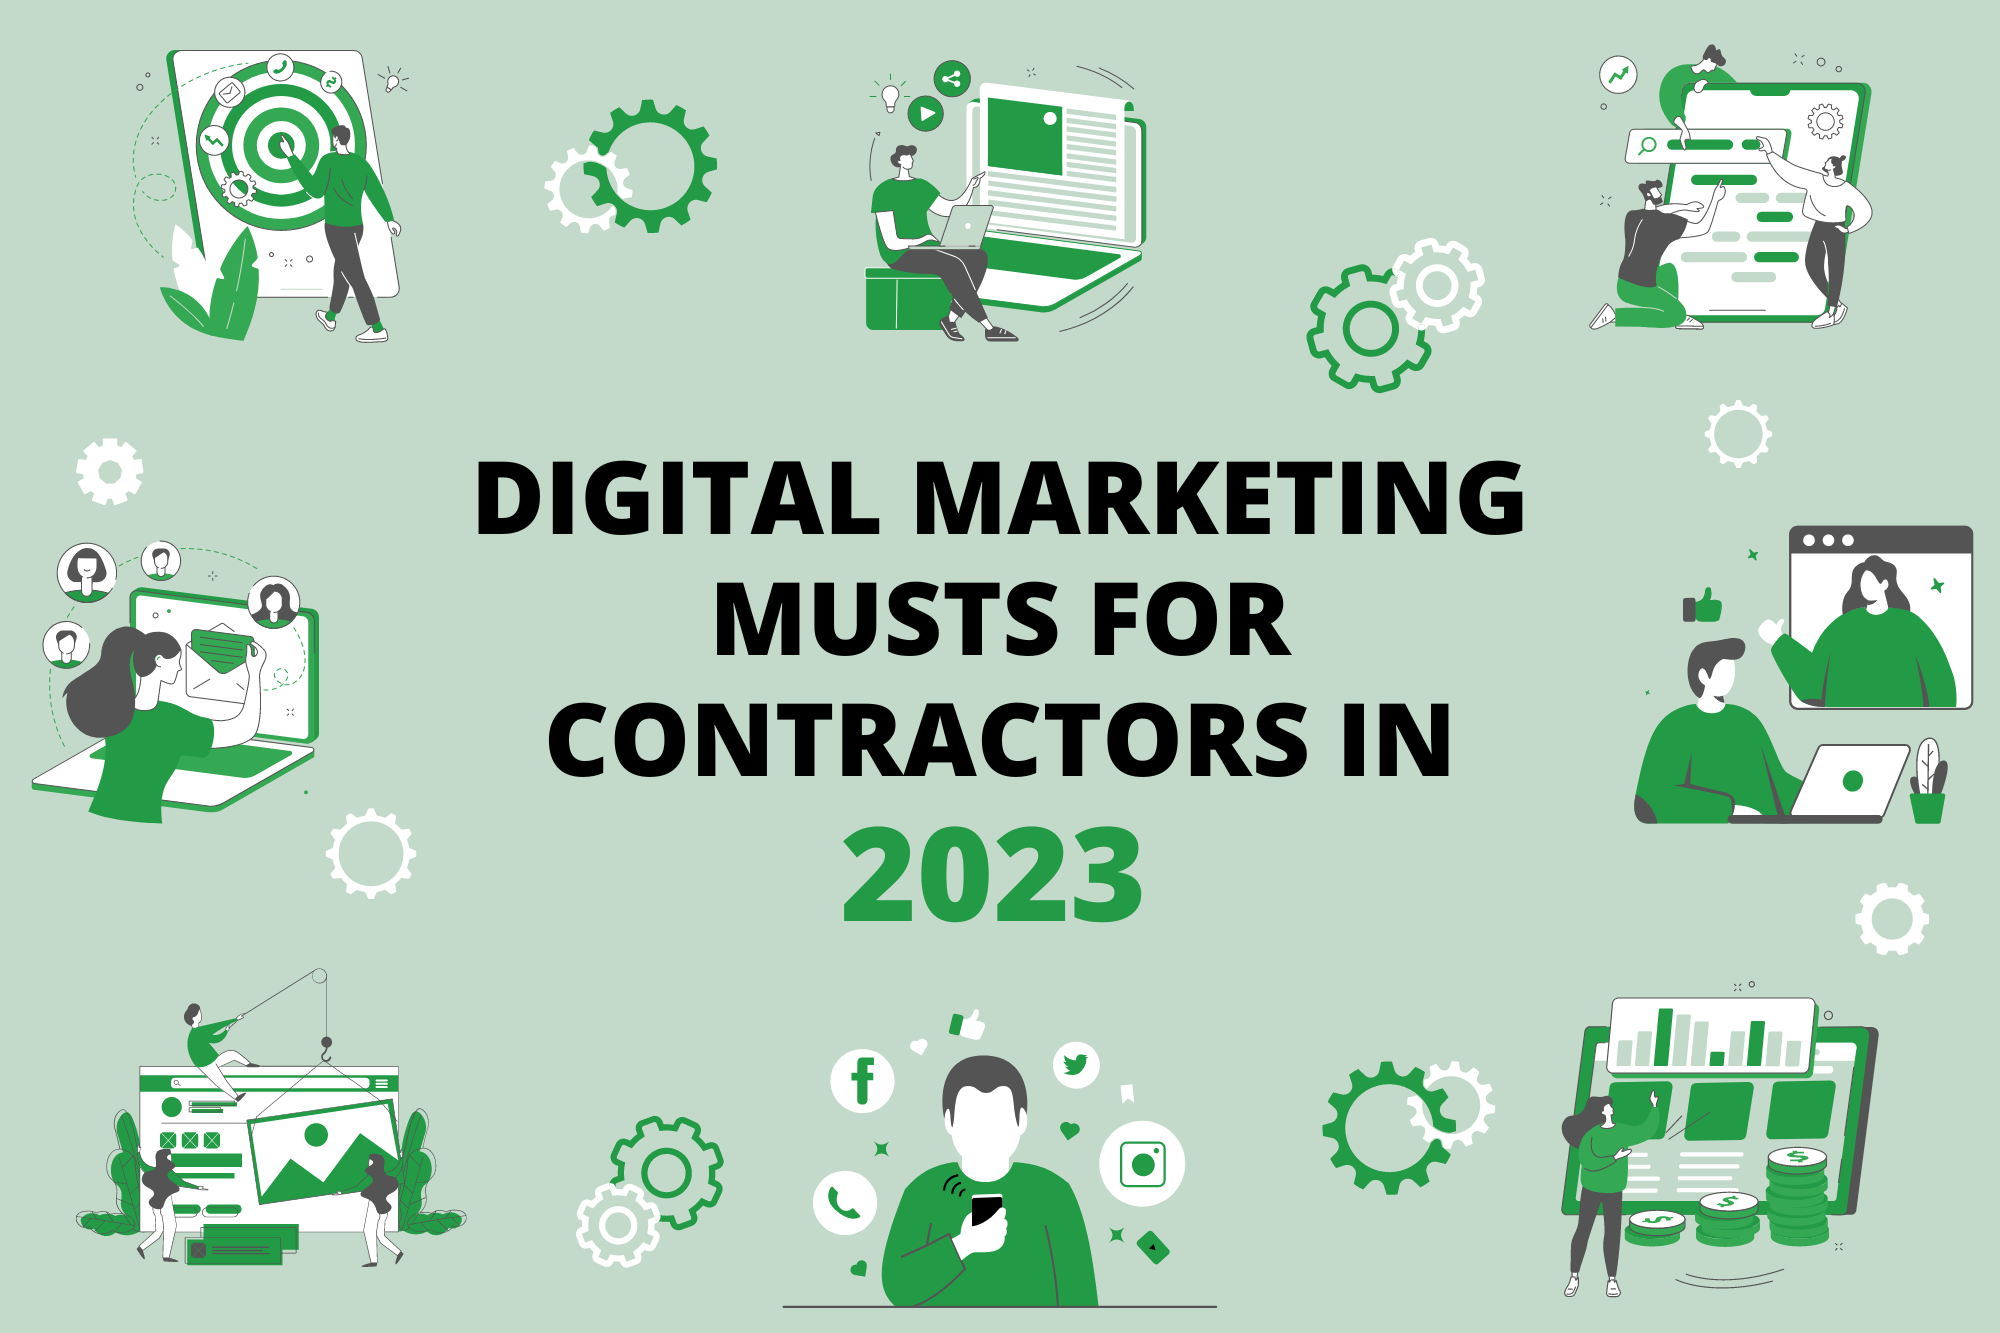 Digital Marketing Musts for Contractors in 2023